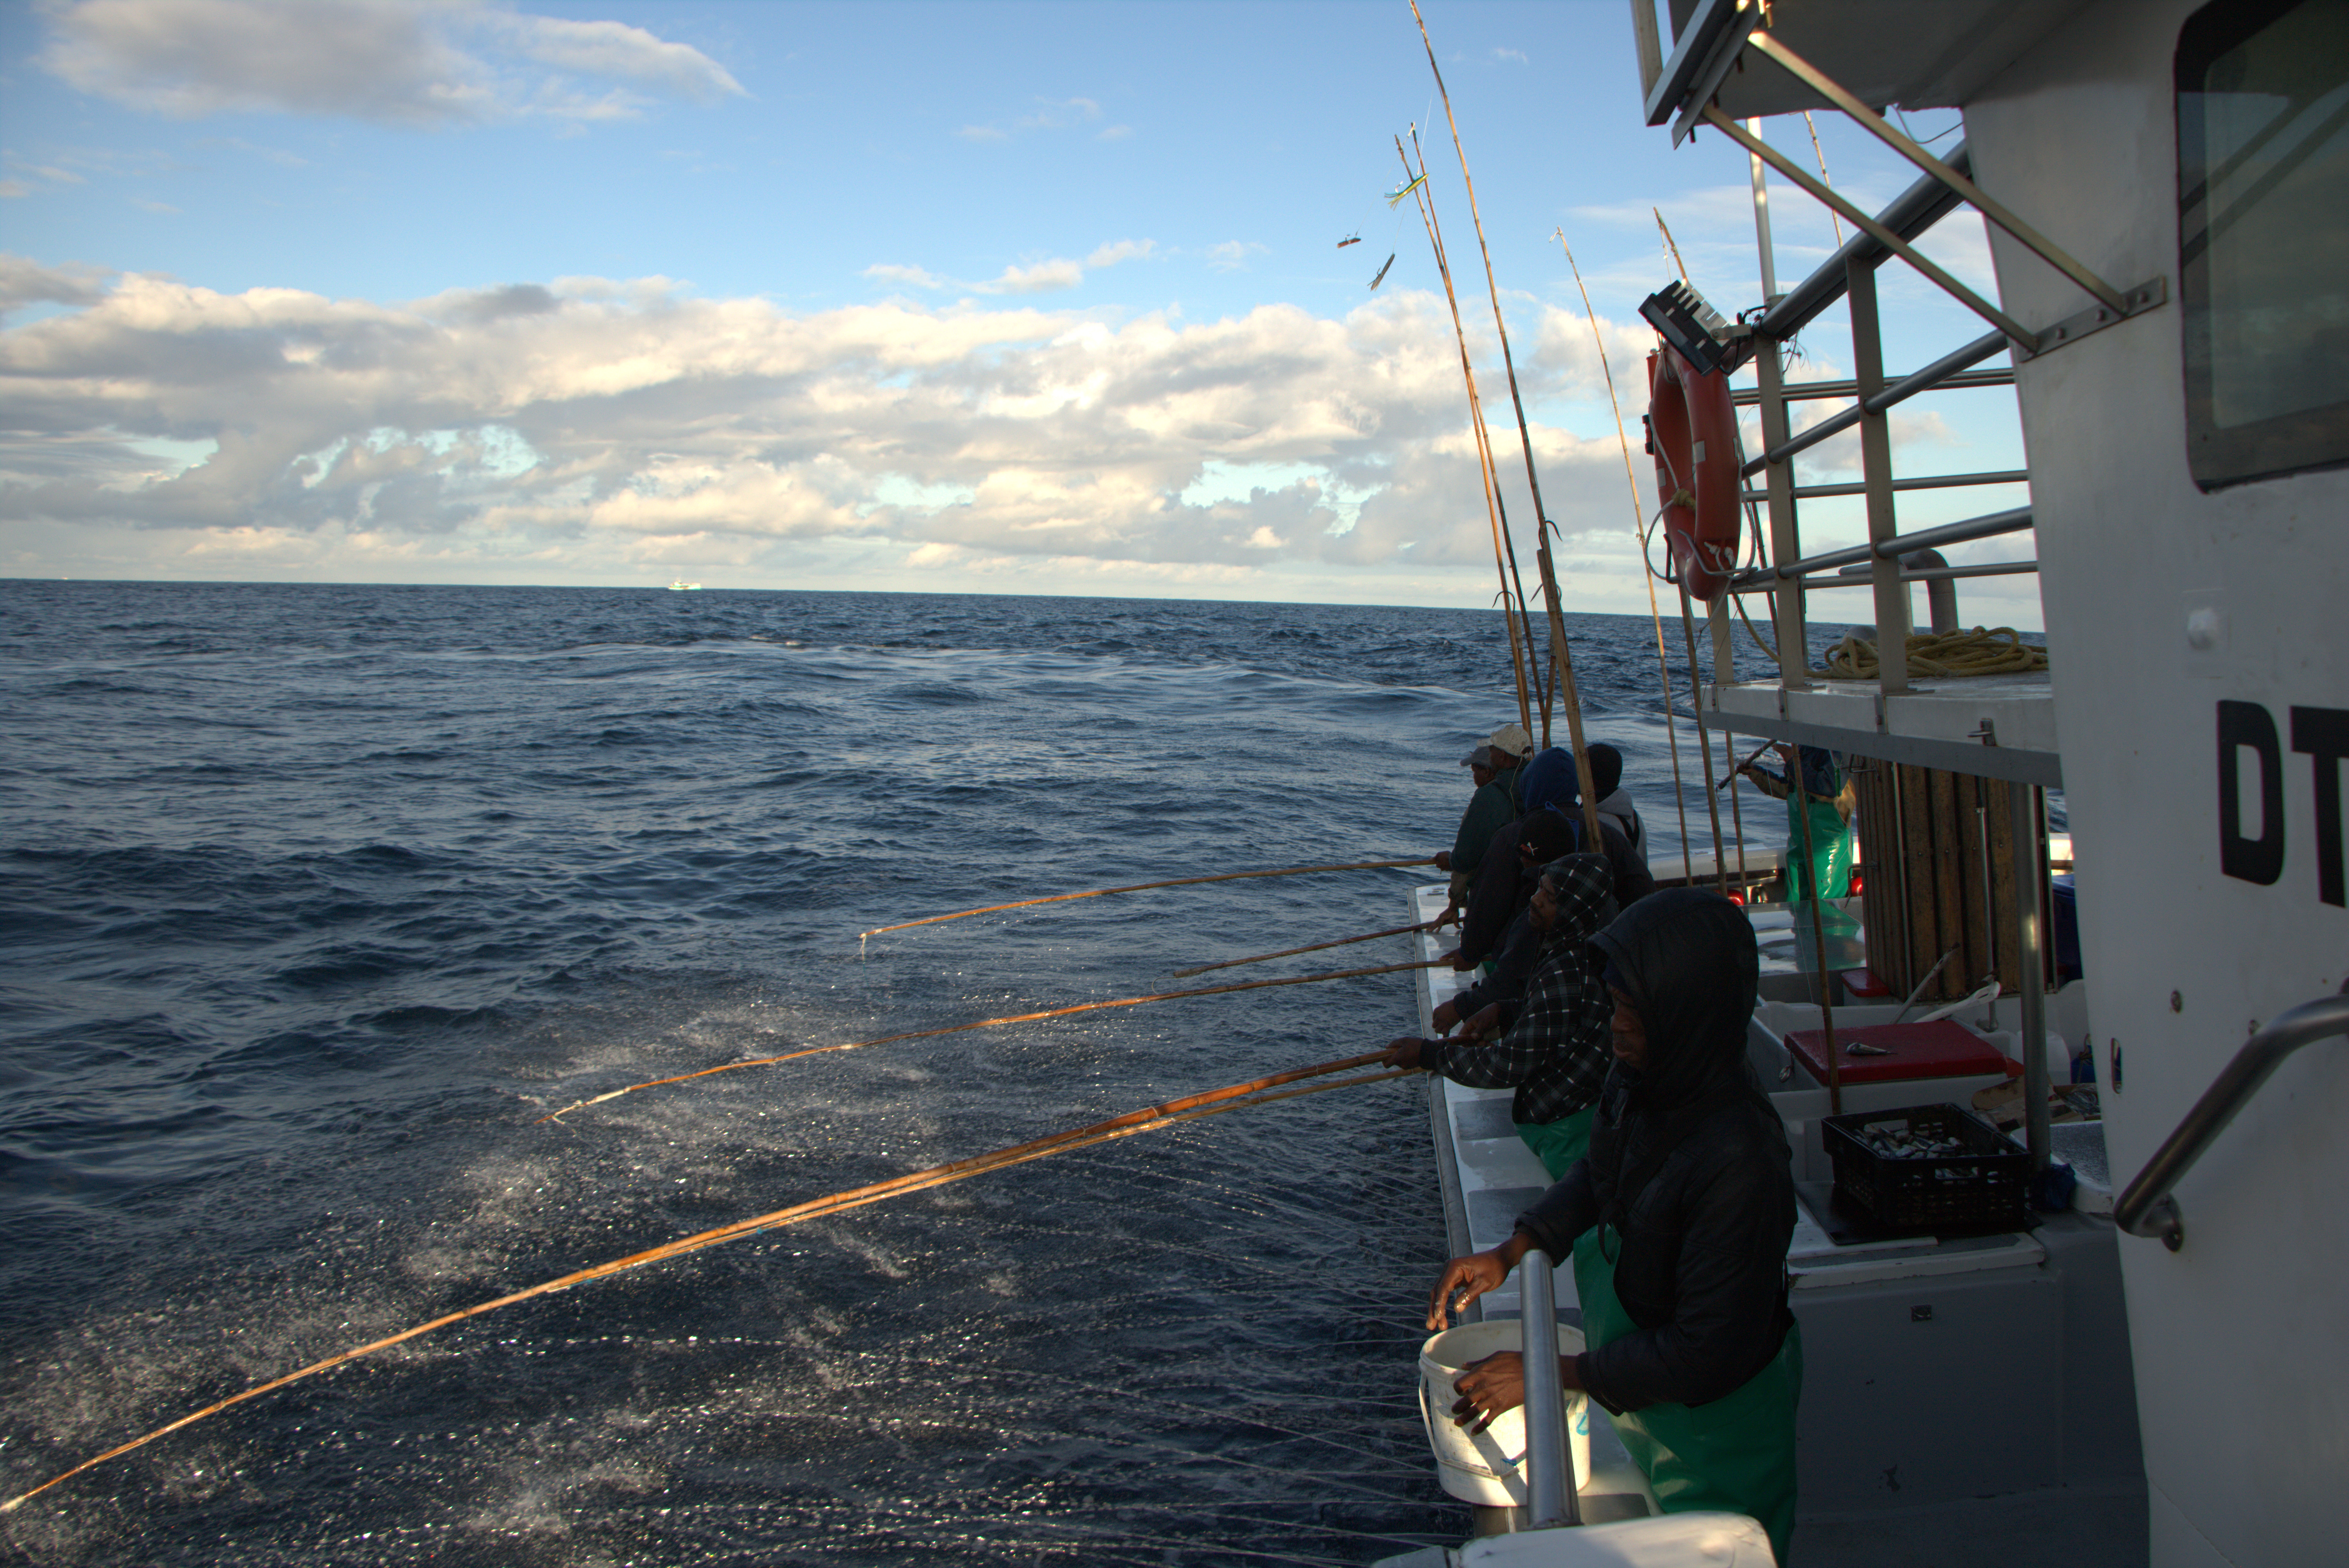 Pole and line fishers on a South African pole and line fishing vessel